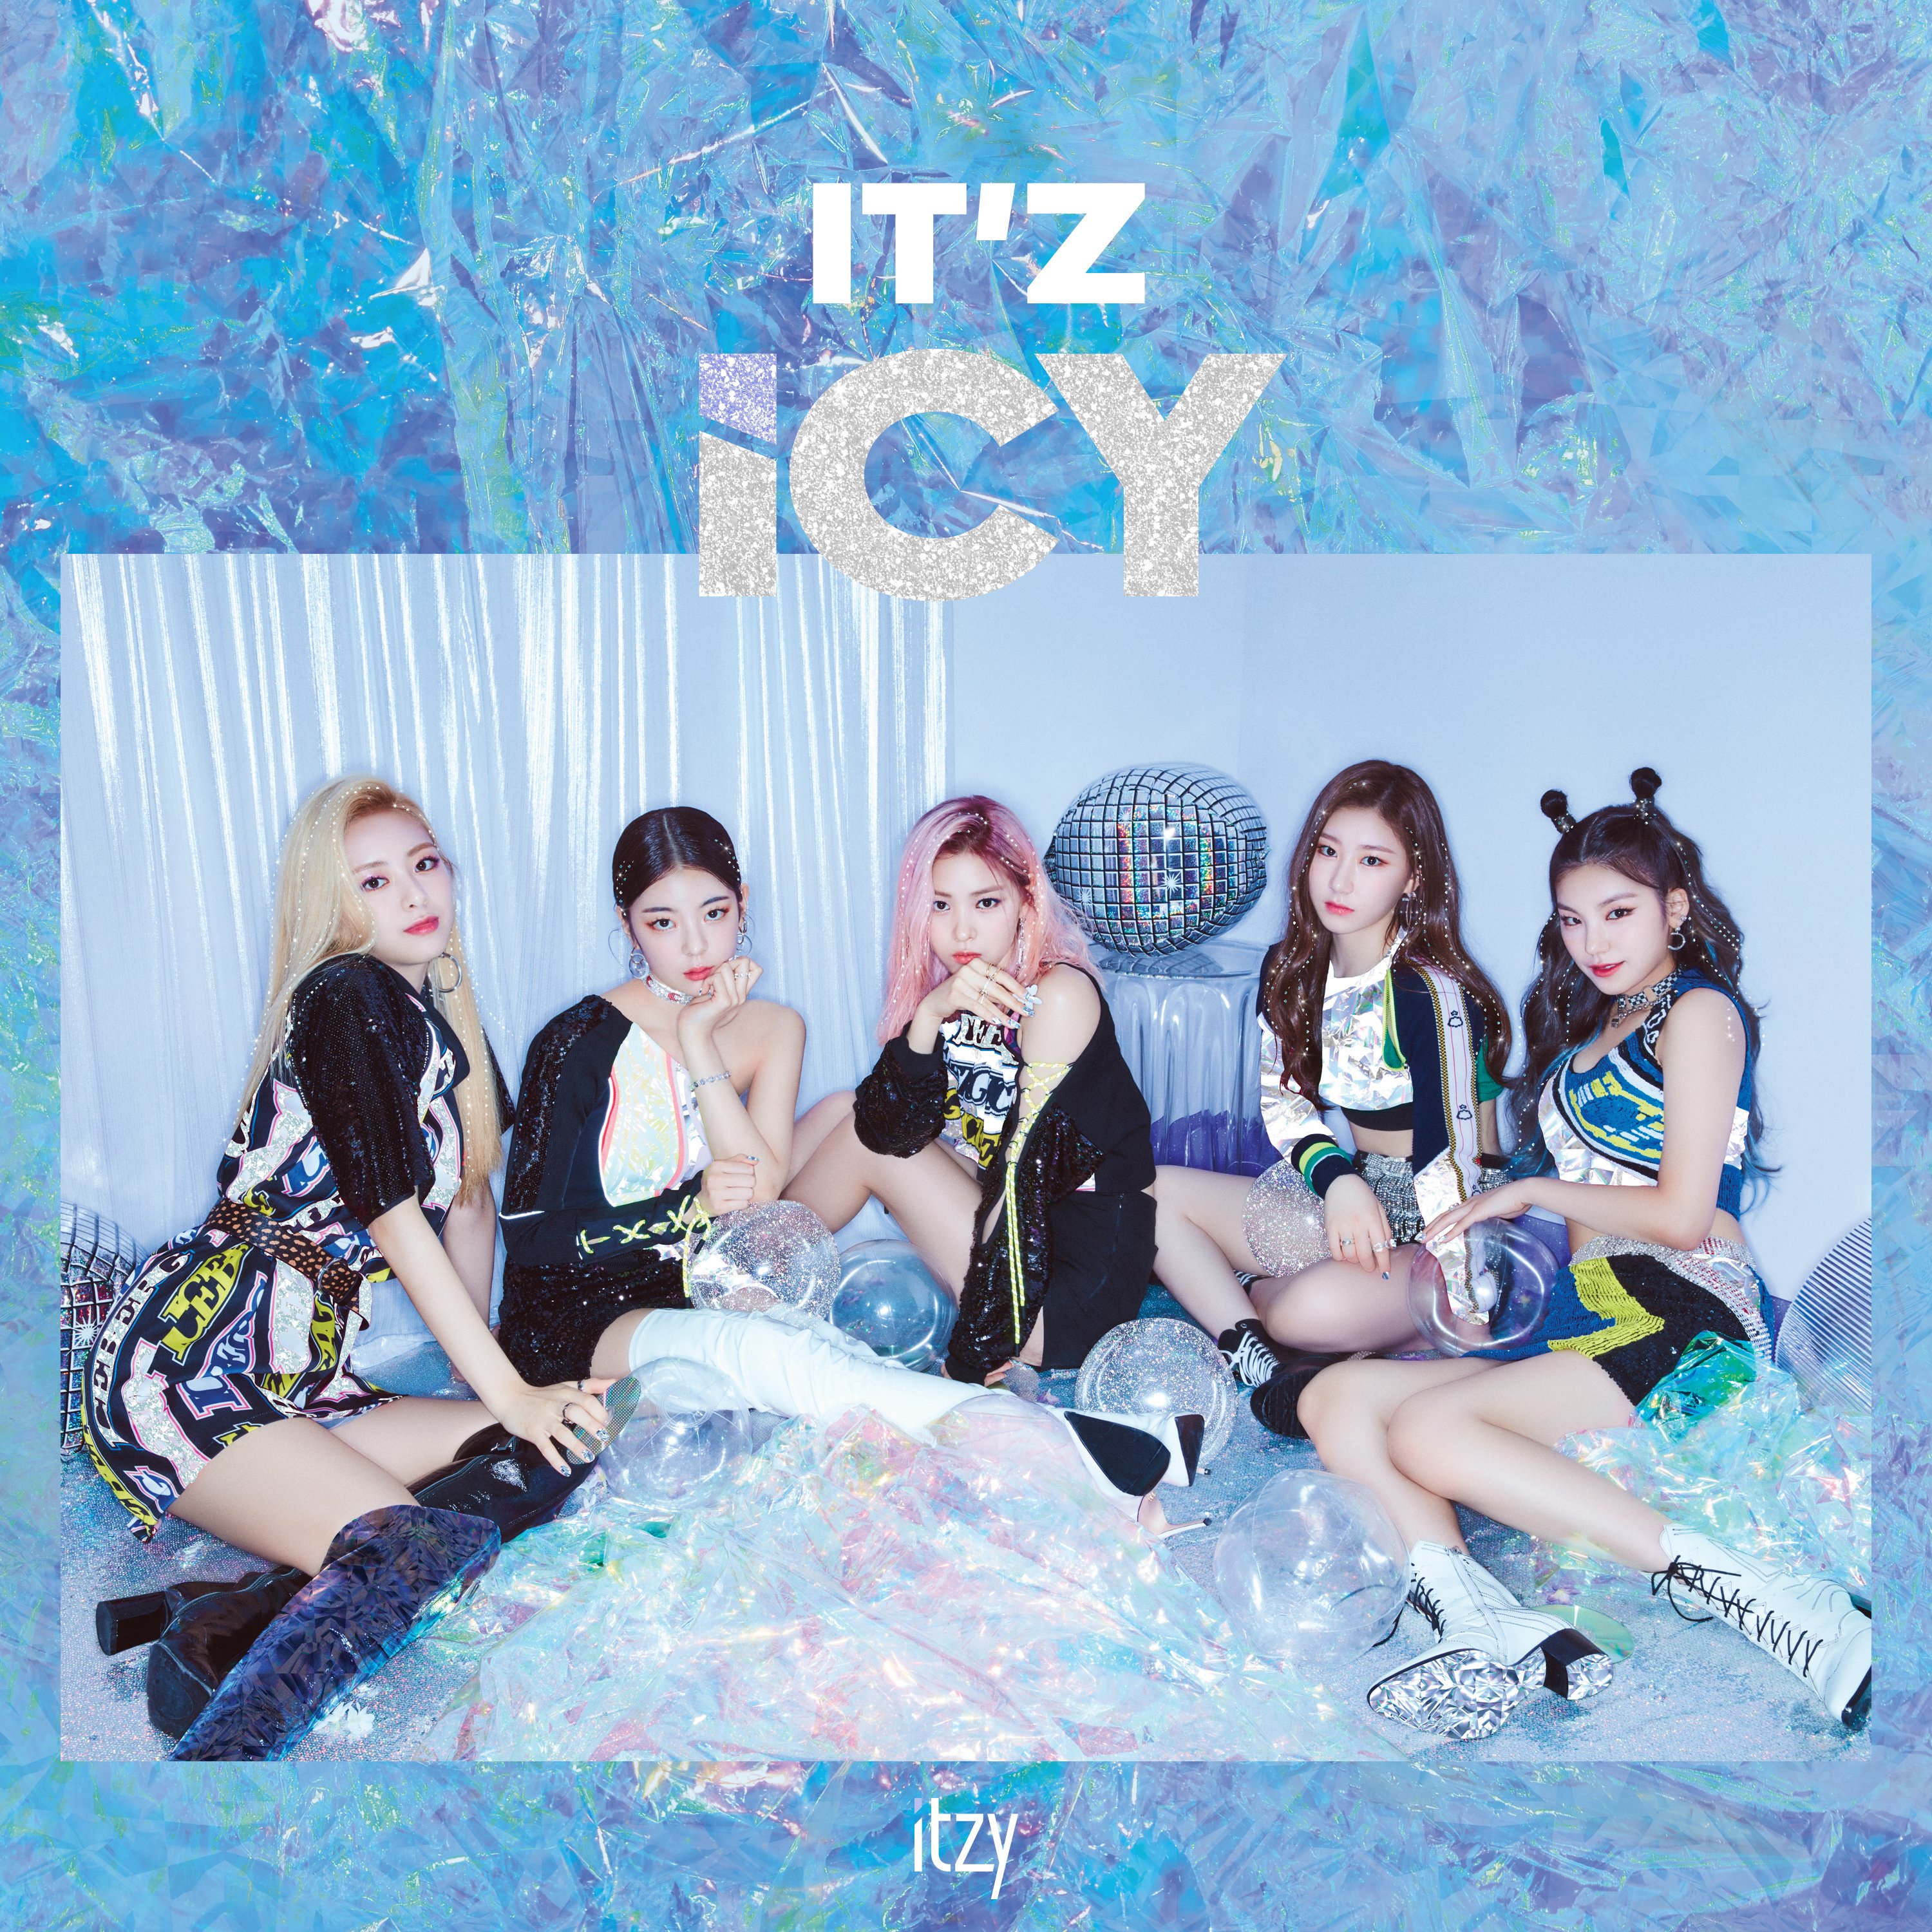 Update: ITZY Counts Down To Comeback With D-1 Poster For “SNEAKERS